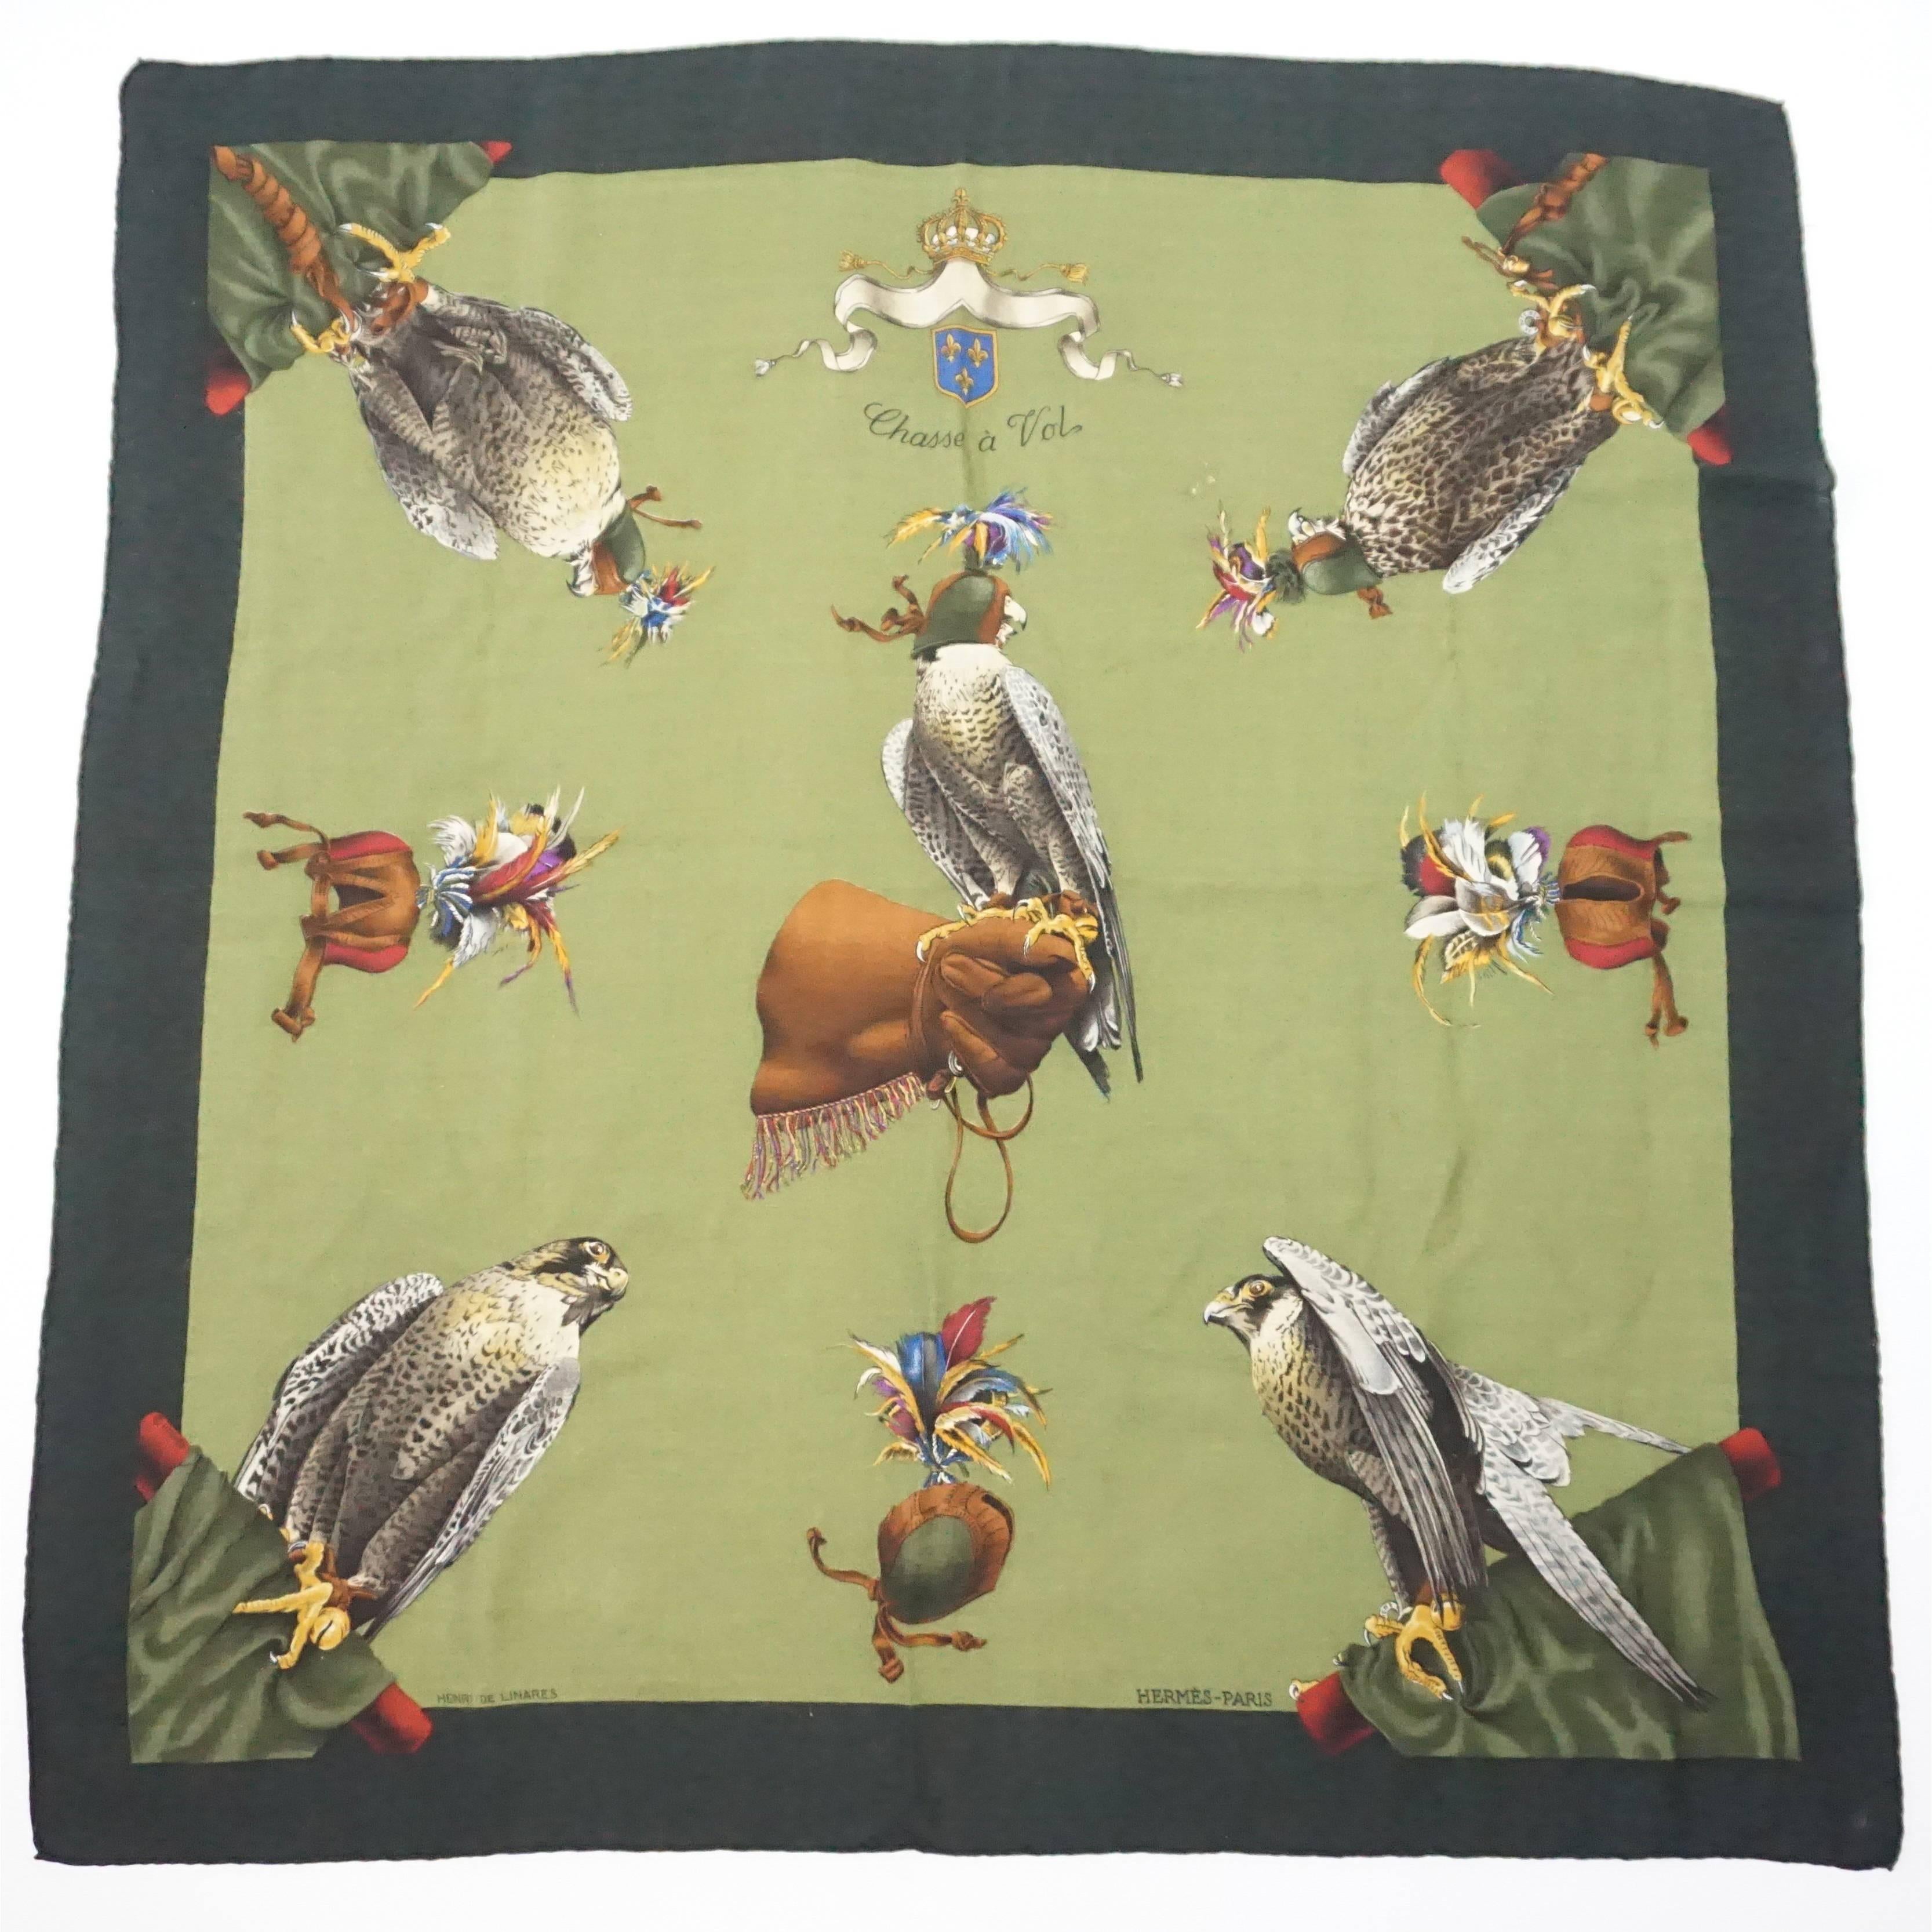 Hermes Green Cashmere "Chasse a Vol" Hawk Print Scarf